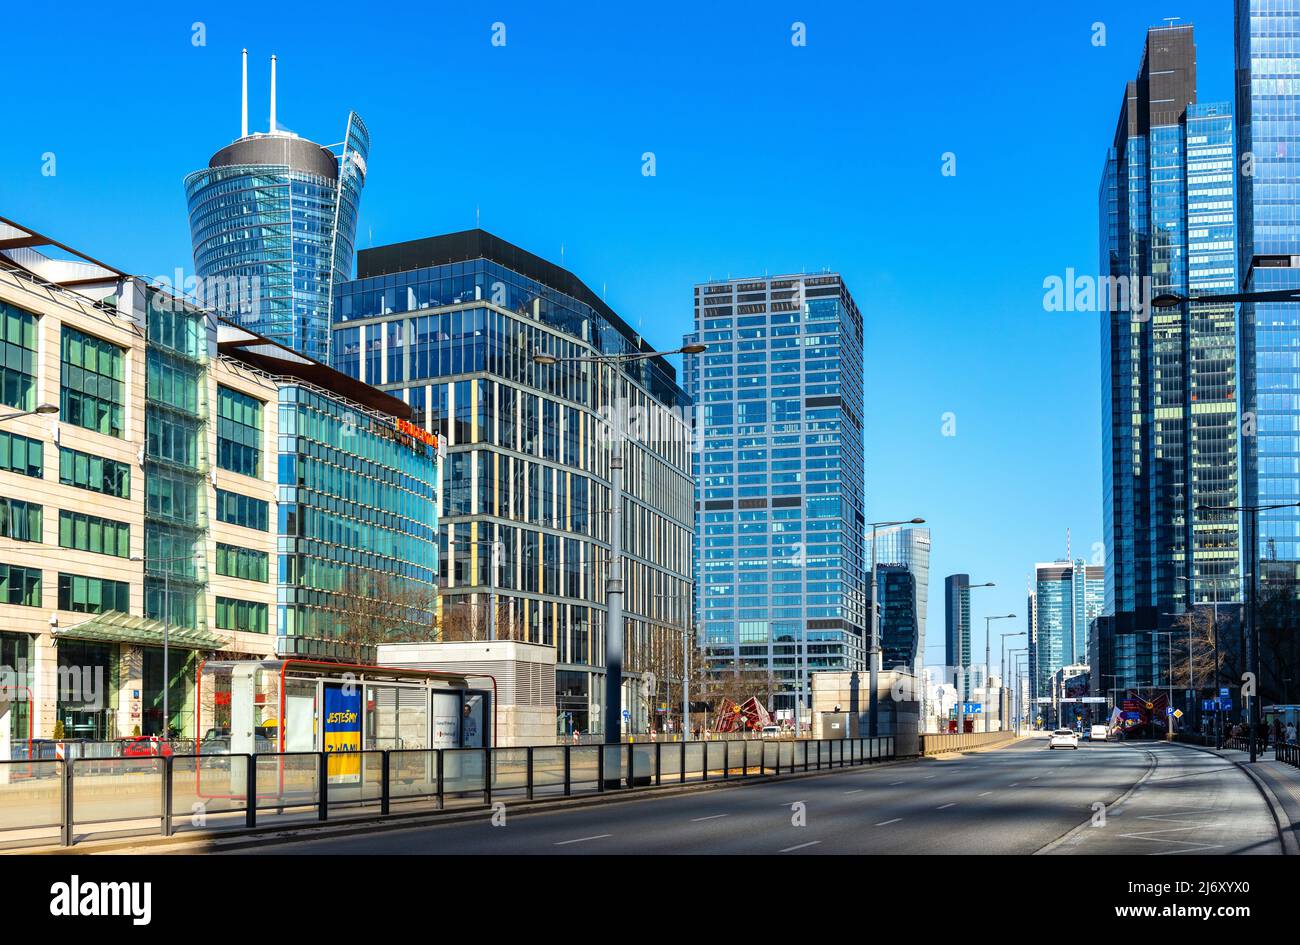 Warsaw, Poland - March 18, 2022: Wola business district of Warsaw city center with Proximo Park, Spire, Generation Park and Unit Spinnaker at Prosta s Stock Photo